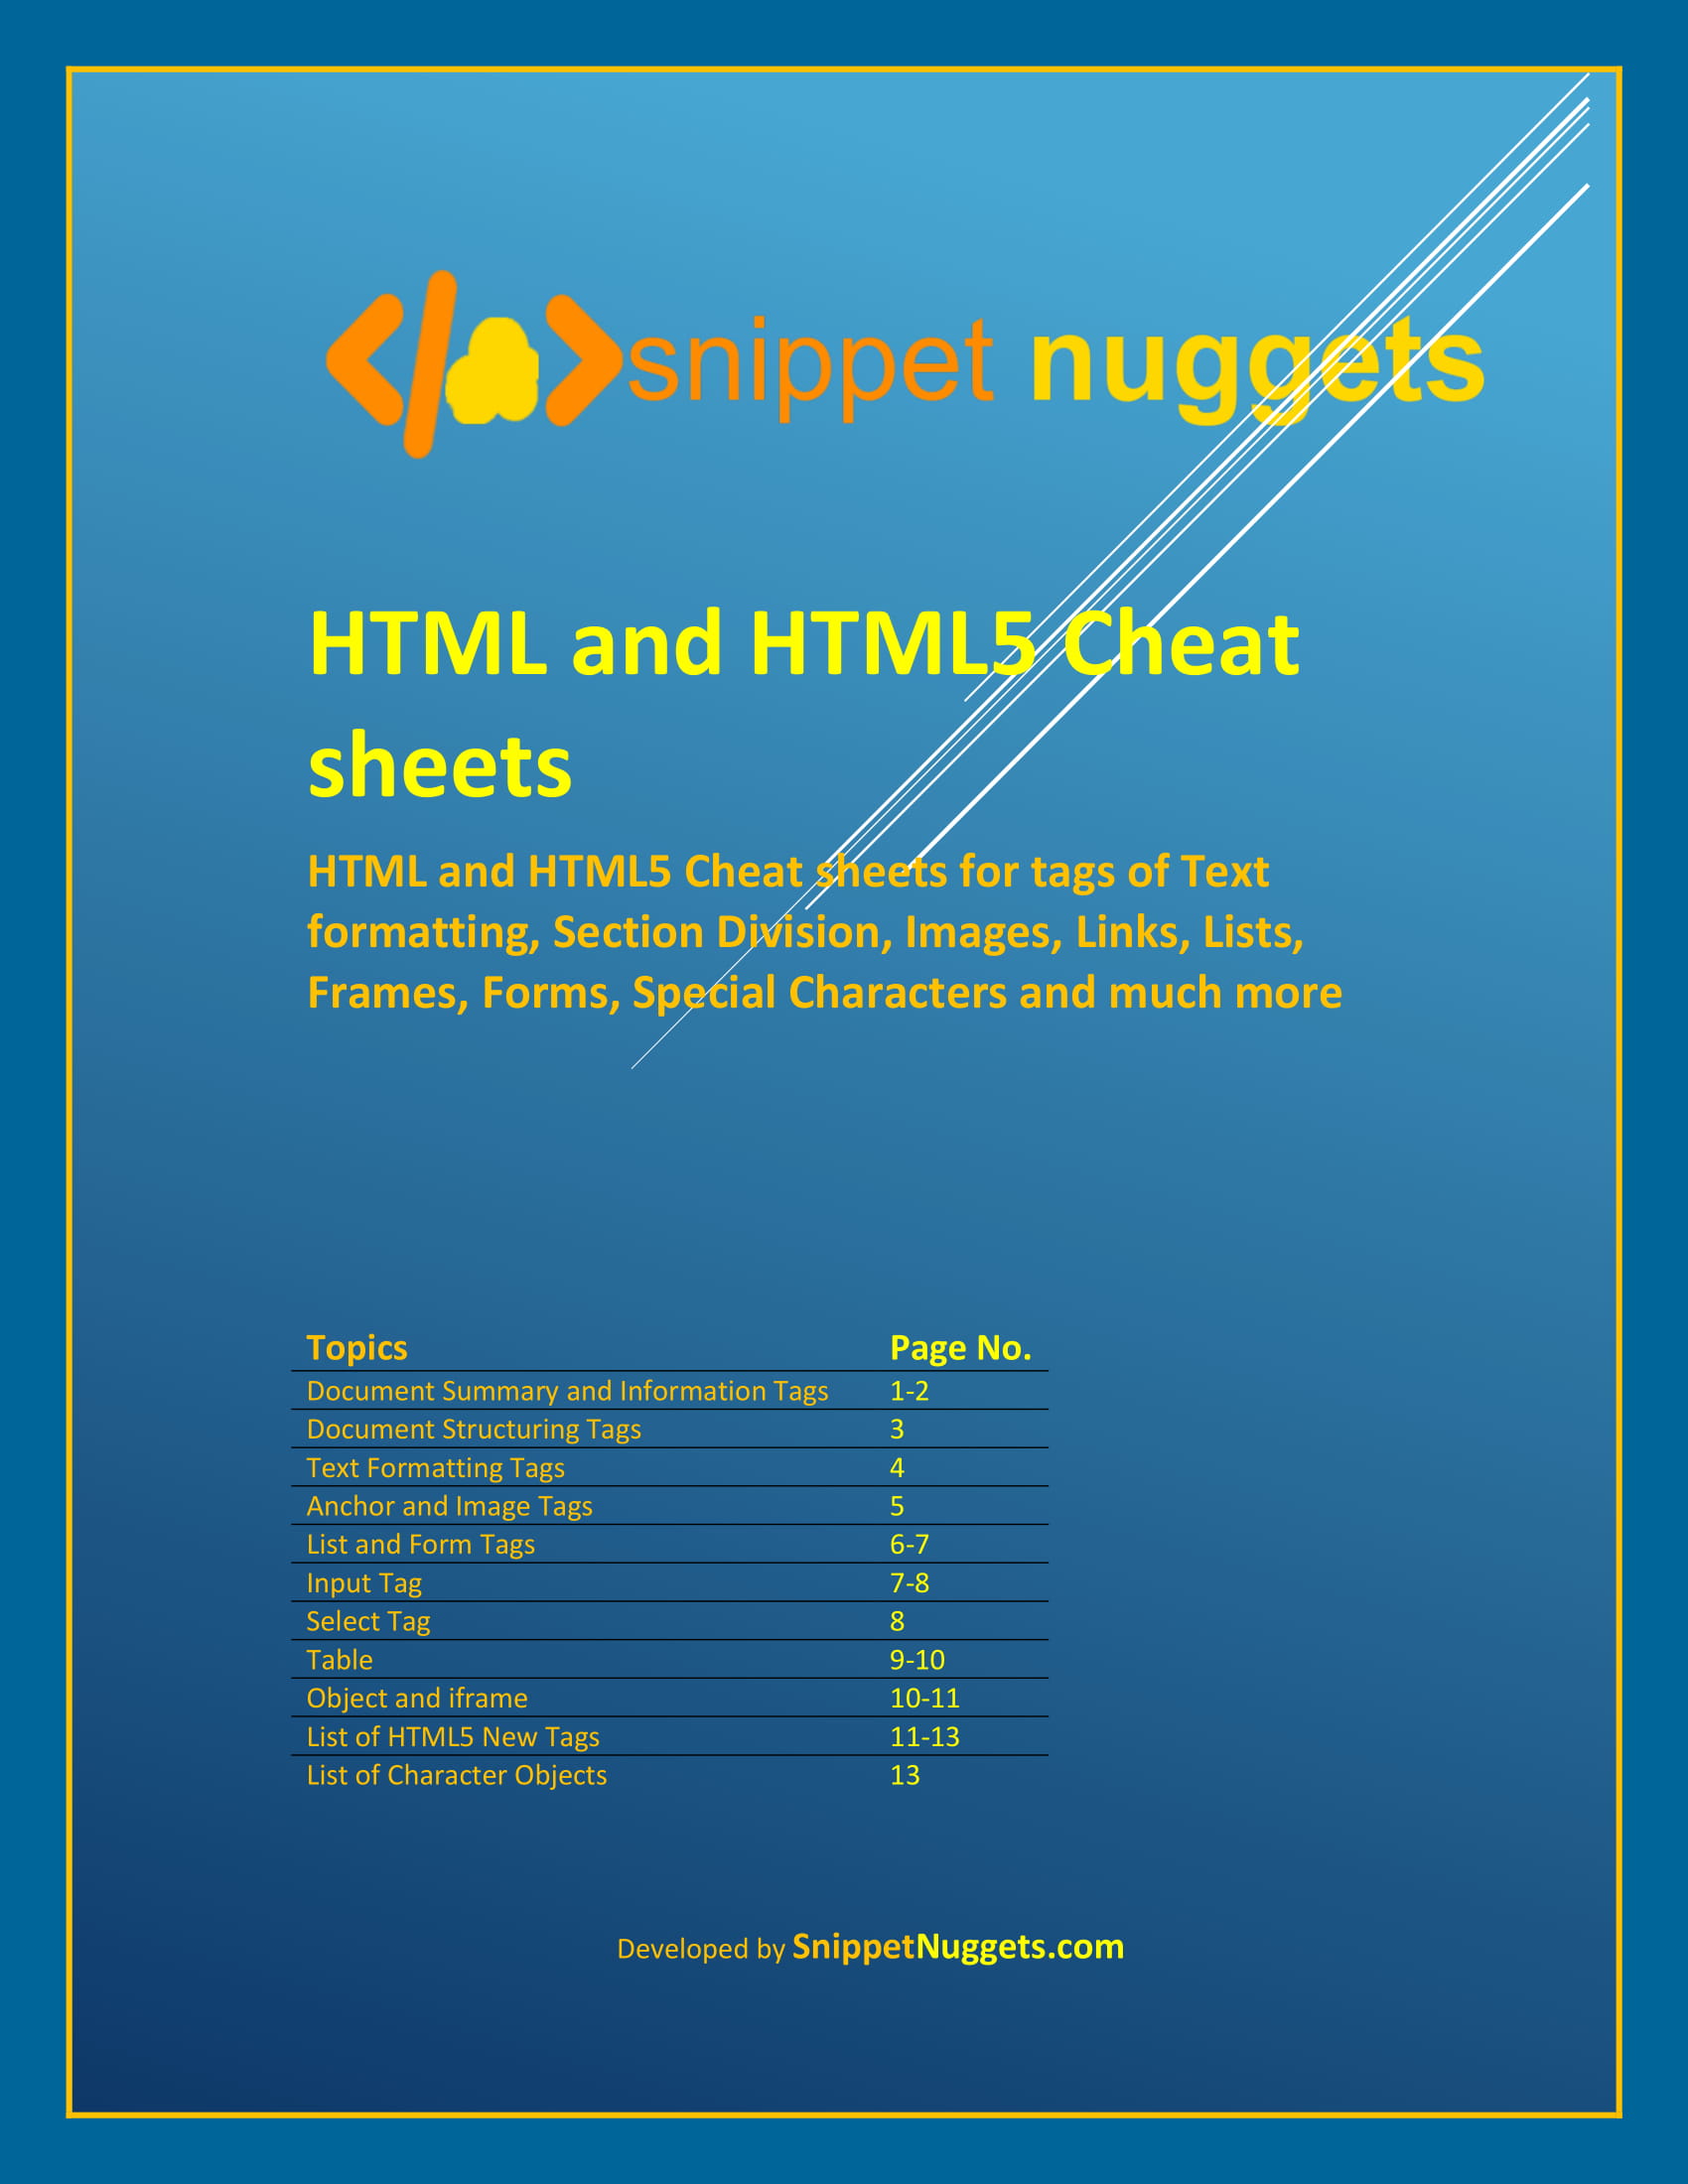 html cheat sheet for 2019 new tag included cover page www.snippetnuggets.com